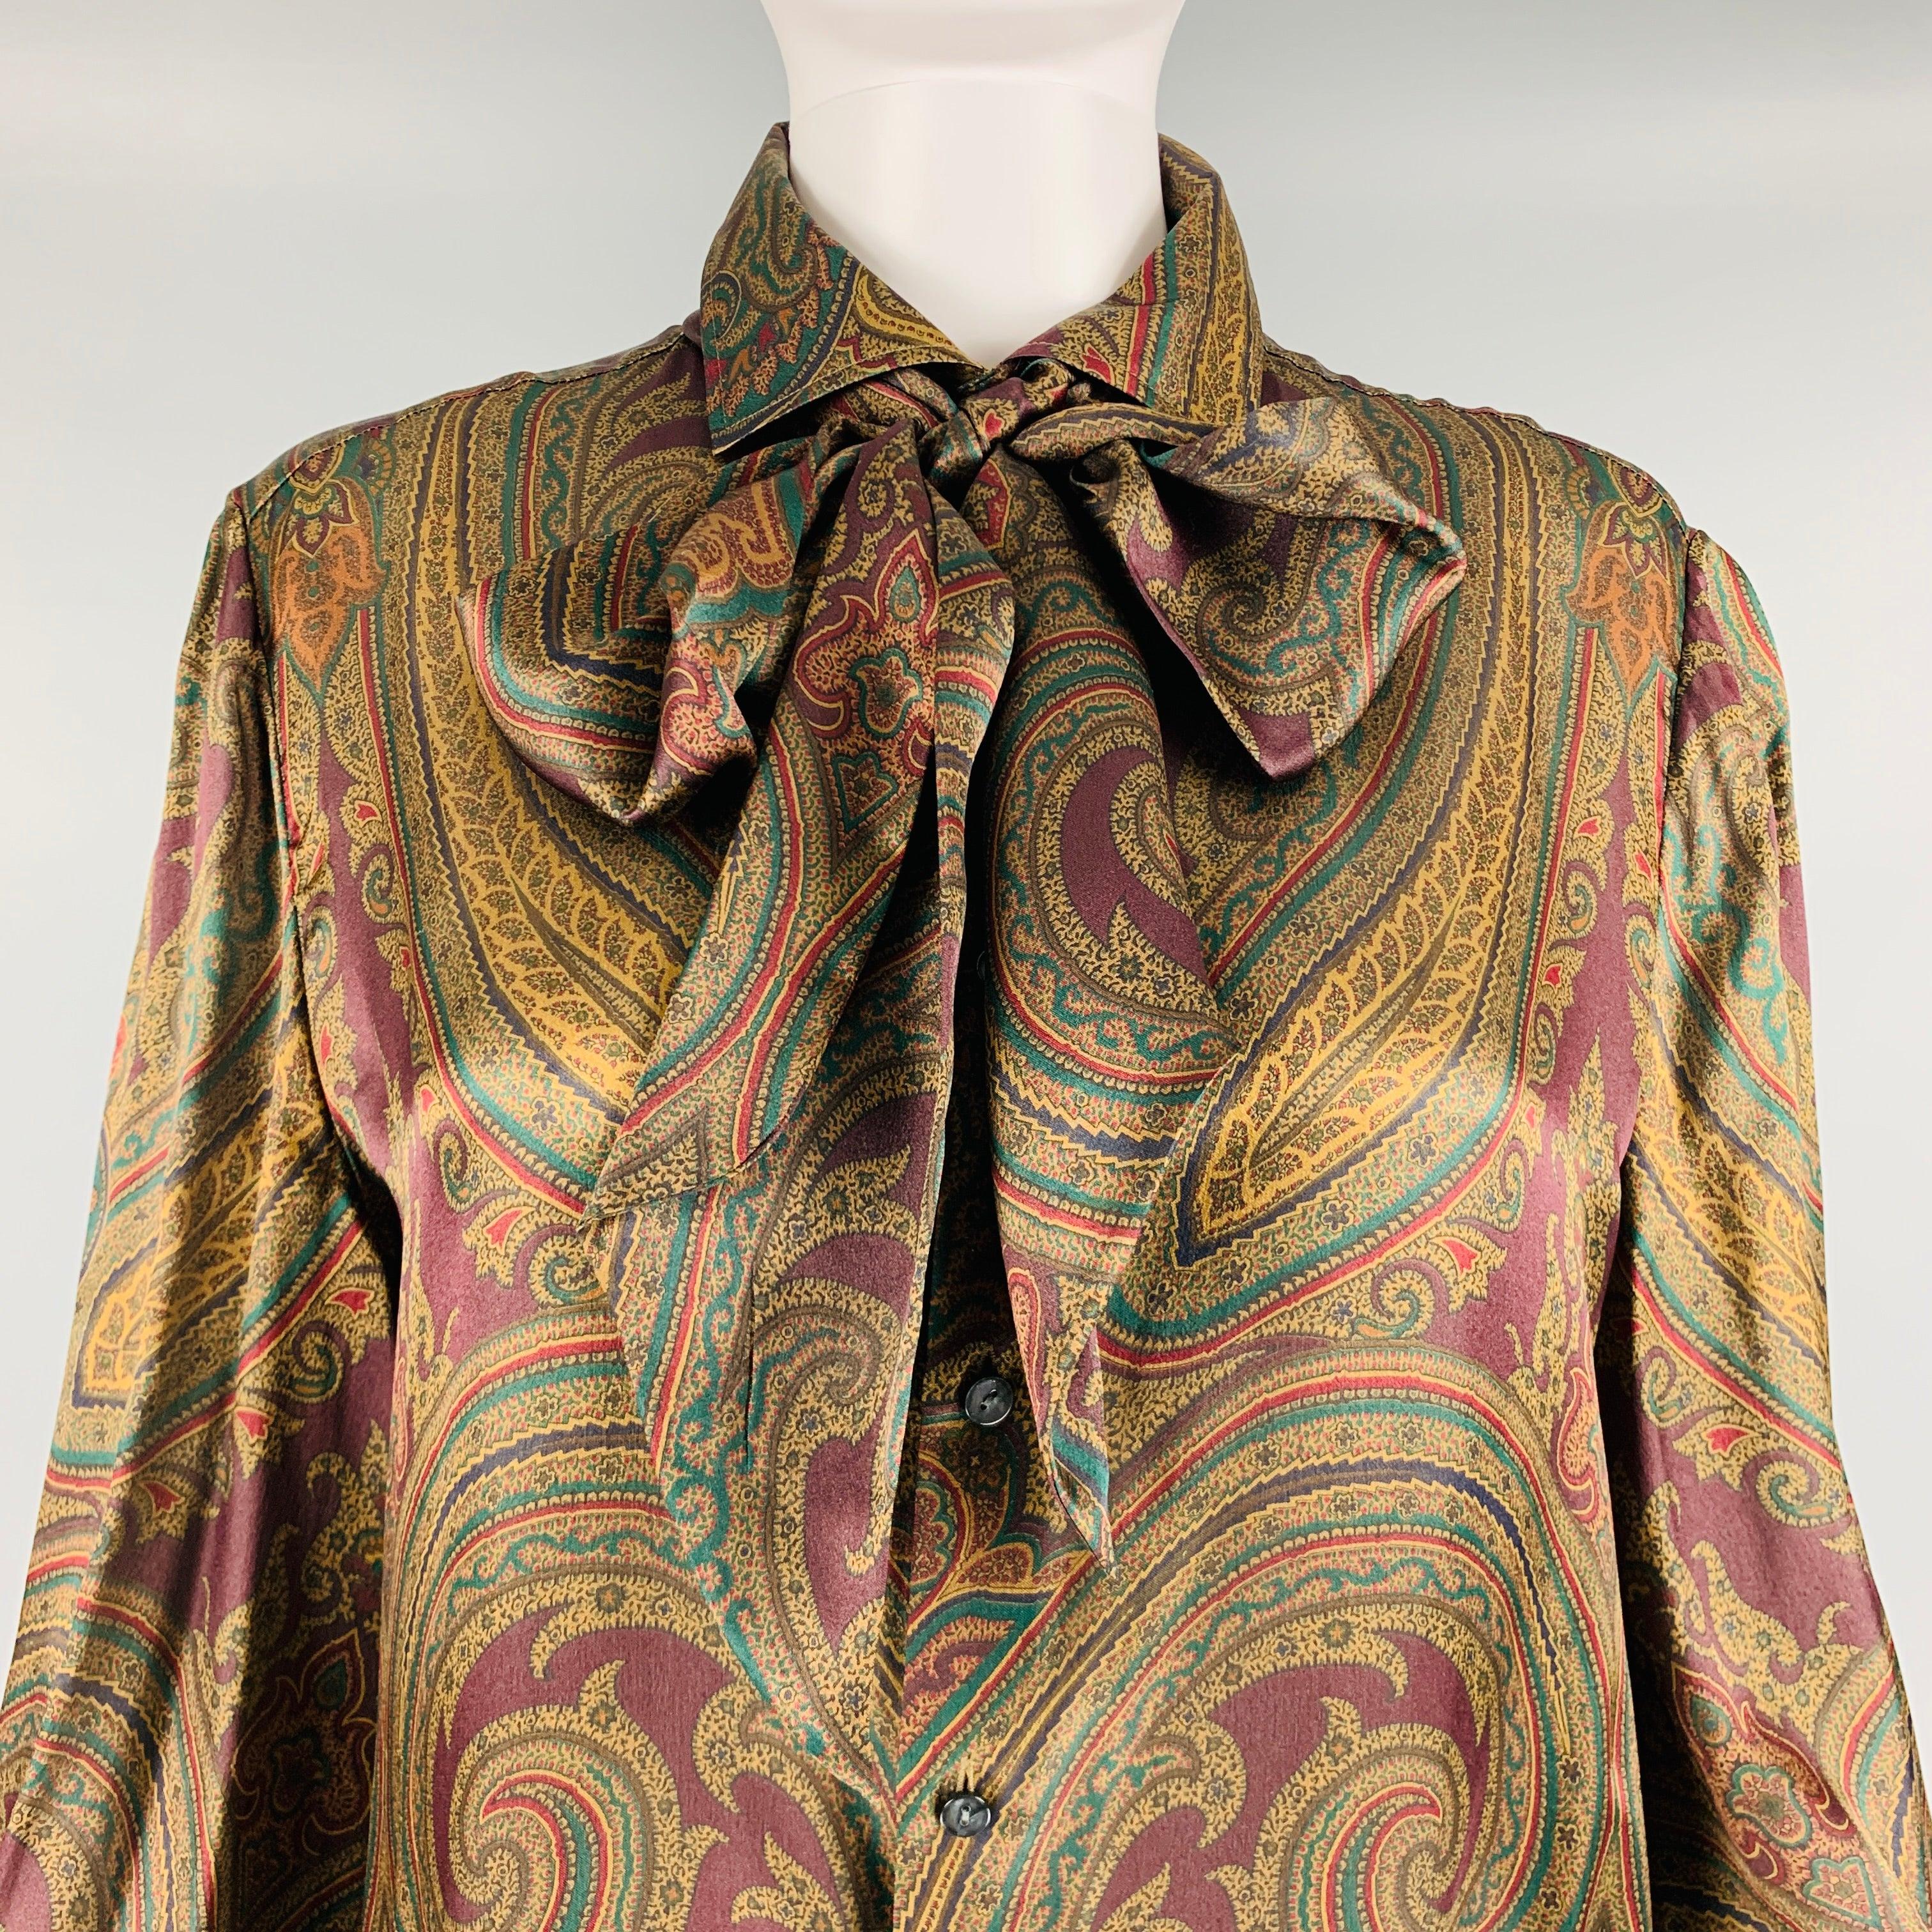 RALPH LAUREN BLACK LABEL long sleeves blouse comes in multi-color silk woven features a paisley print, extra scarf, straight collar, and button down closure. New with Tags. 

Marked:   12 

Measurements: 
 
Shoulder: 15.25 inches Bust: 43 inches